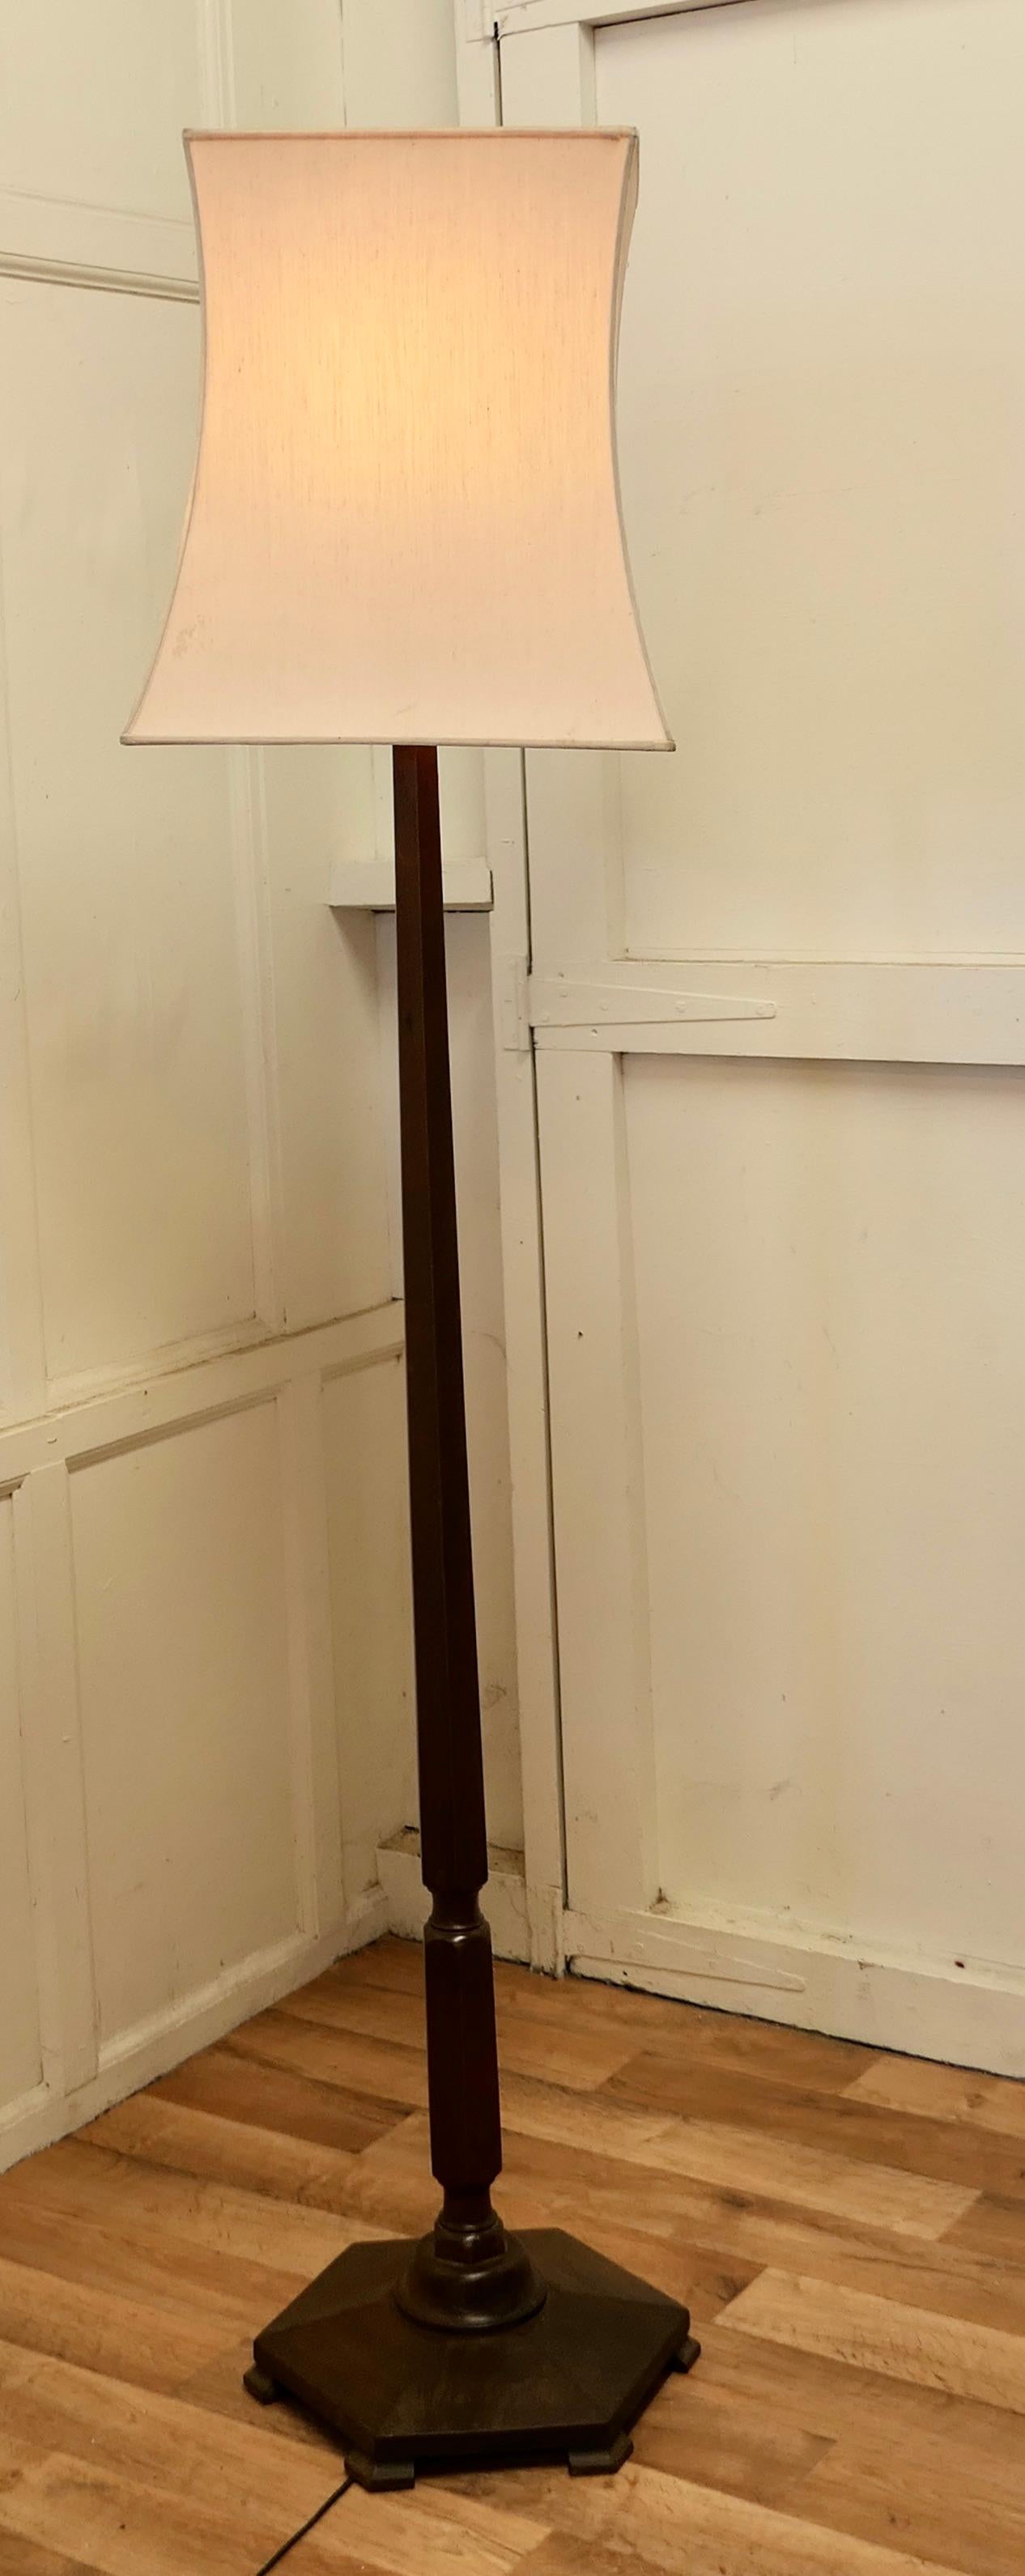 Art Deco walnut floor standing or standard lamp

This is an attractive good quality piece in figured walnut, the lamp stands on a beautifully figured walnut base and has a attractively turned upright column
The lamp is in good working